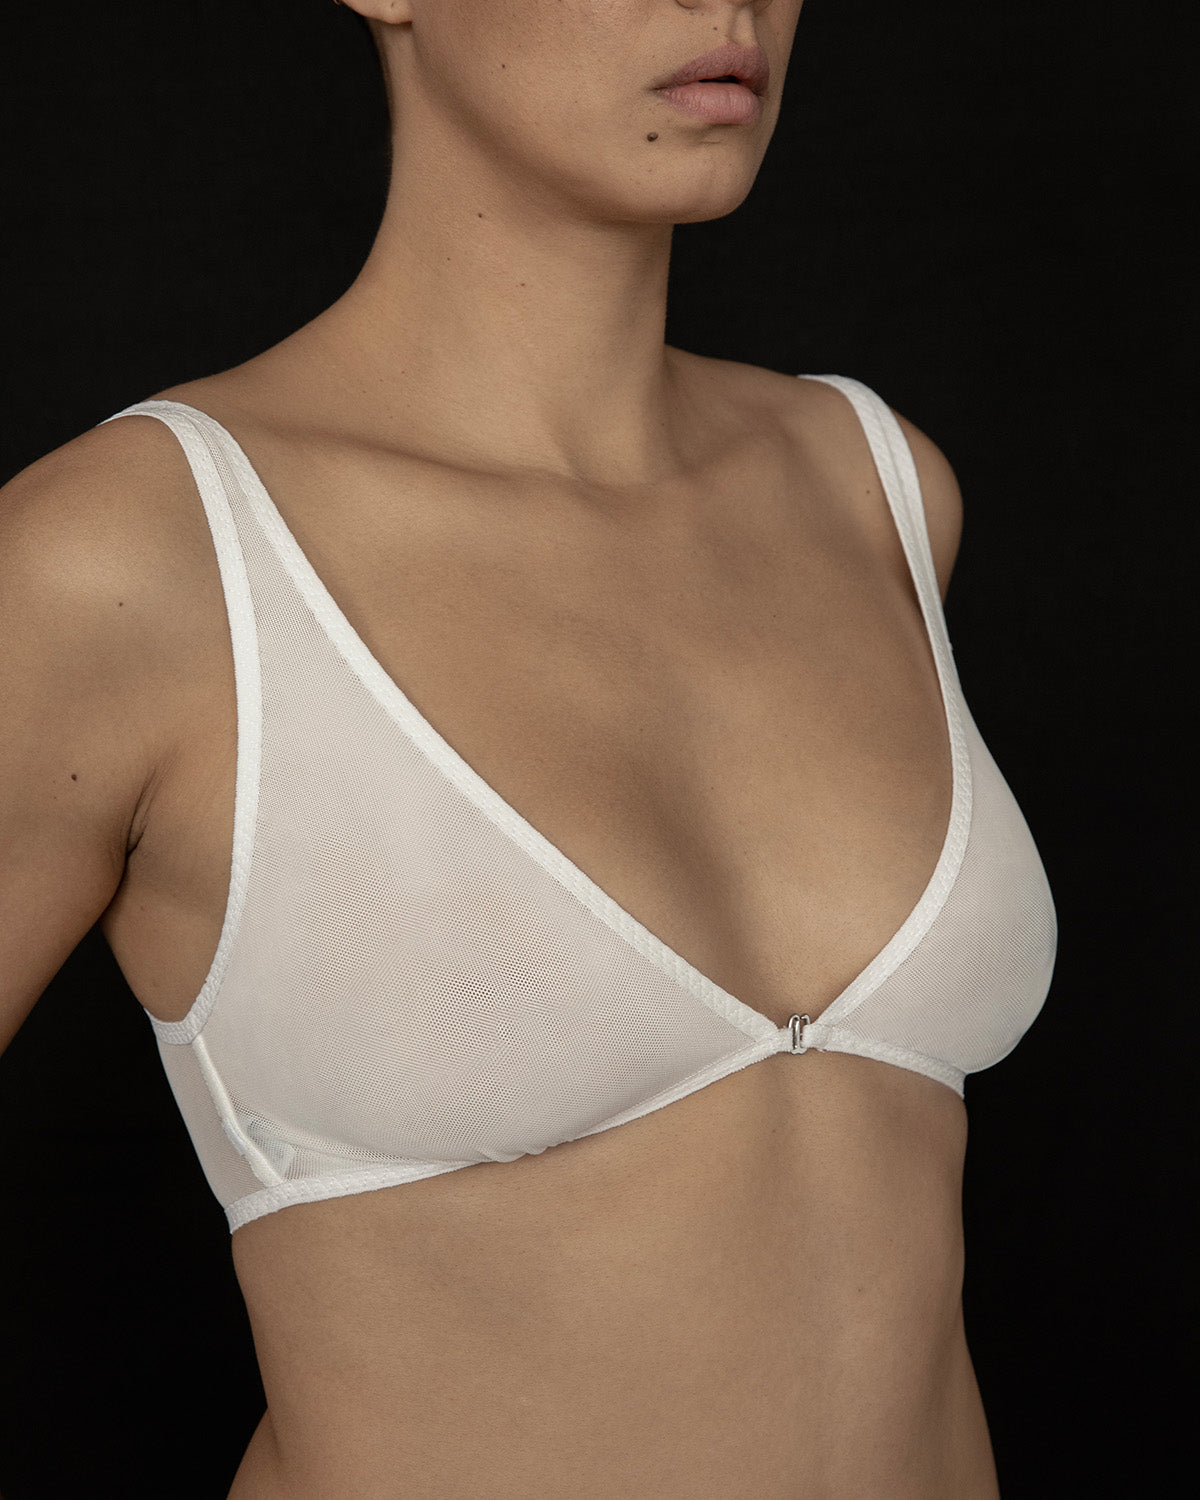 The Kye Intimates Dive Bra in the color bone. A deep V neck bra with front closure, and adjustable shoulder straps. This sheer bra provides gentle, wireless support. Offering the perfect balance between comfort and functionality.  